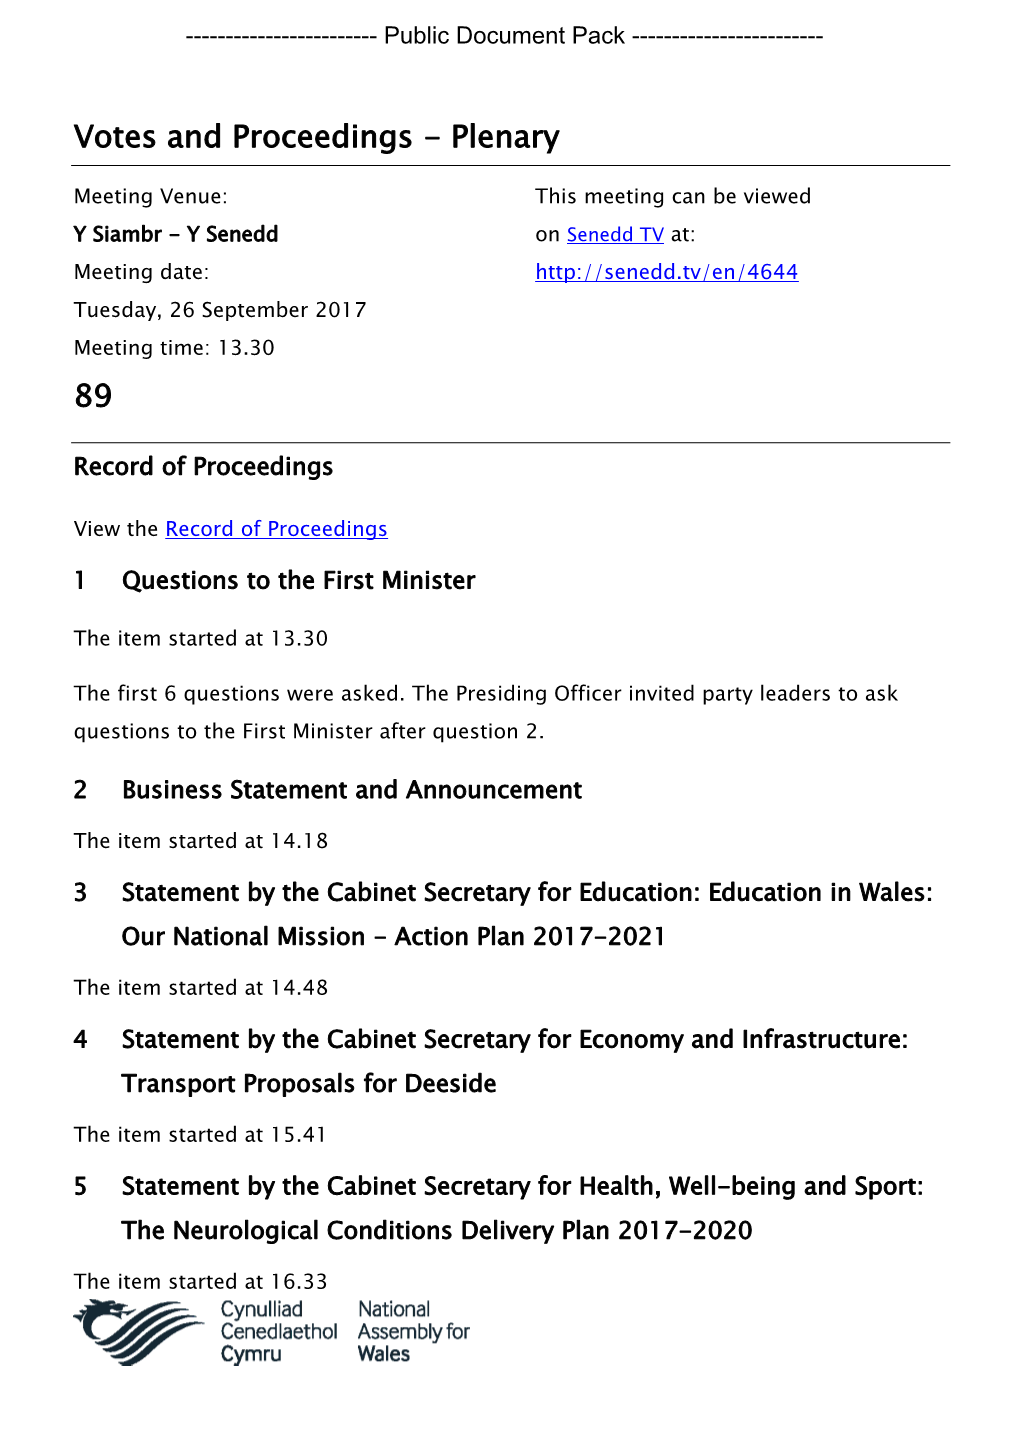 Minutes Document for Plenary, 26/09/2017 13:30